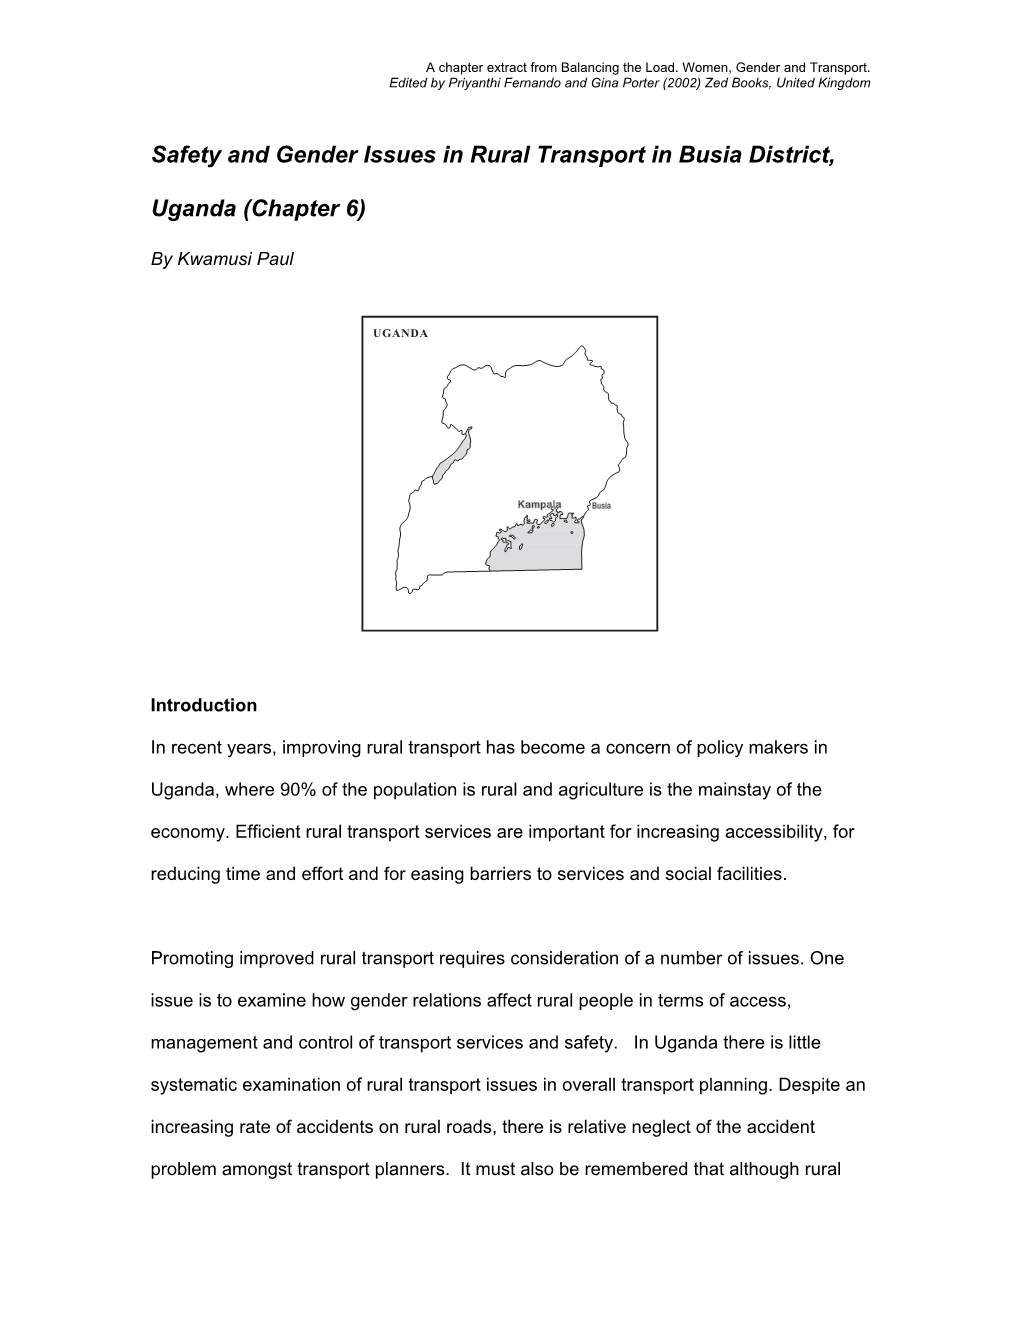 Safety and Gender Issues in Rural Transport in Busia District, Uganda